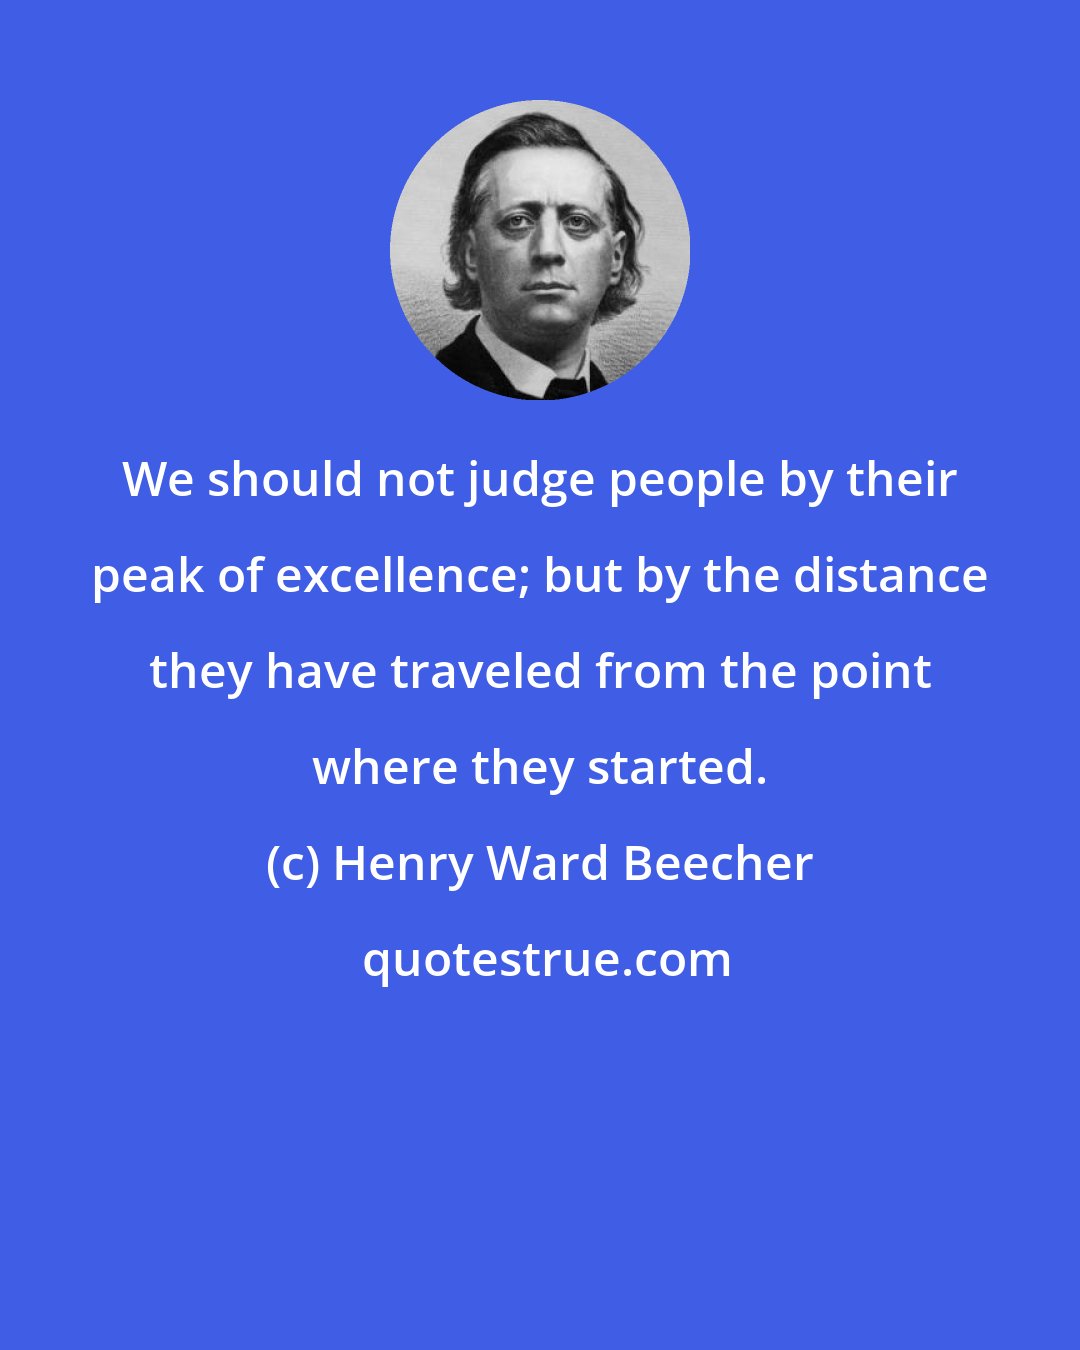 Henry Ward Beecher: We should not judge people by their peak of excellence; but by the distance they have traveled from the point where they started.